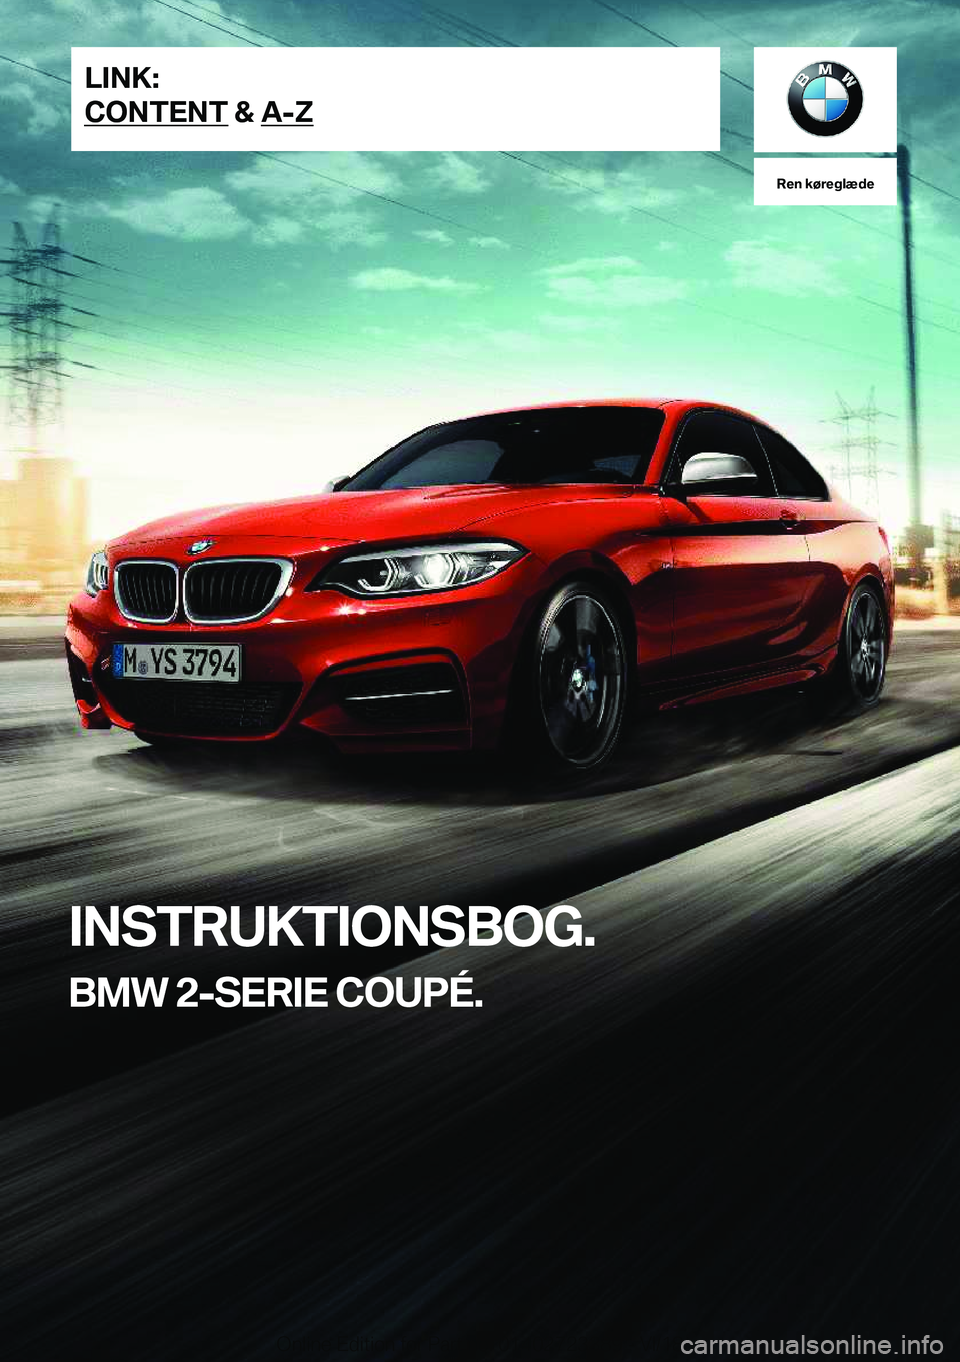 BMW 2 SERIES COUPE 2019  InstruktionsbØger (in Danish) �R�e�n��k�